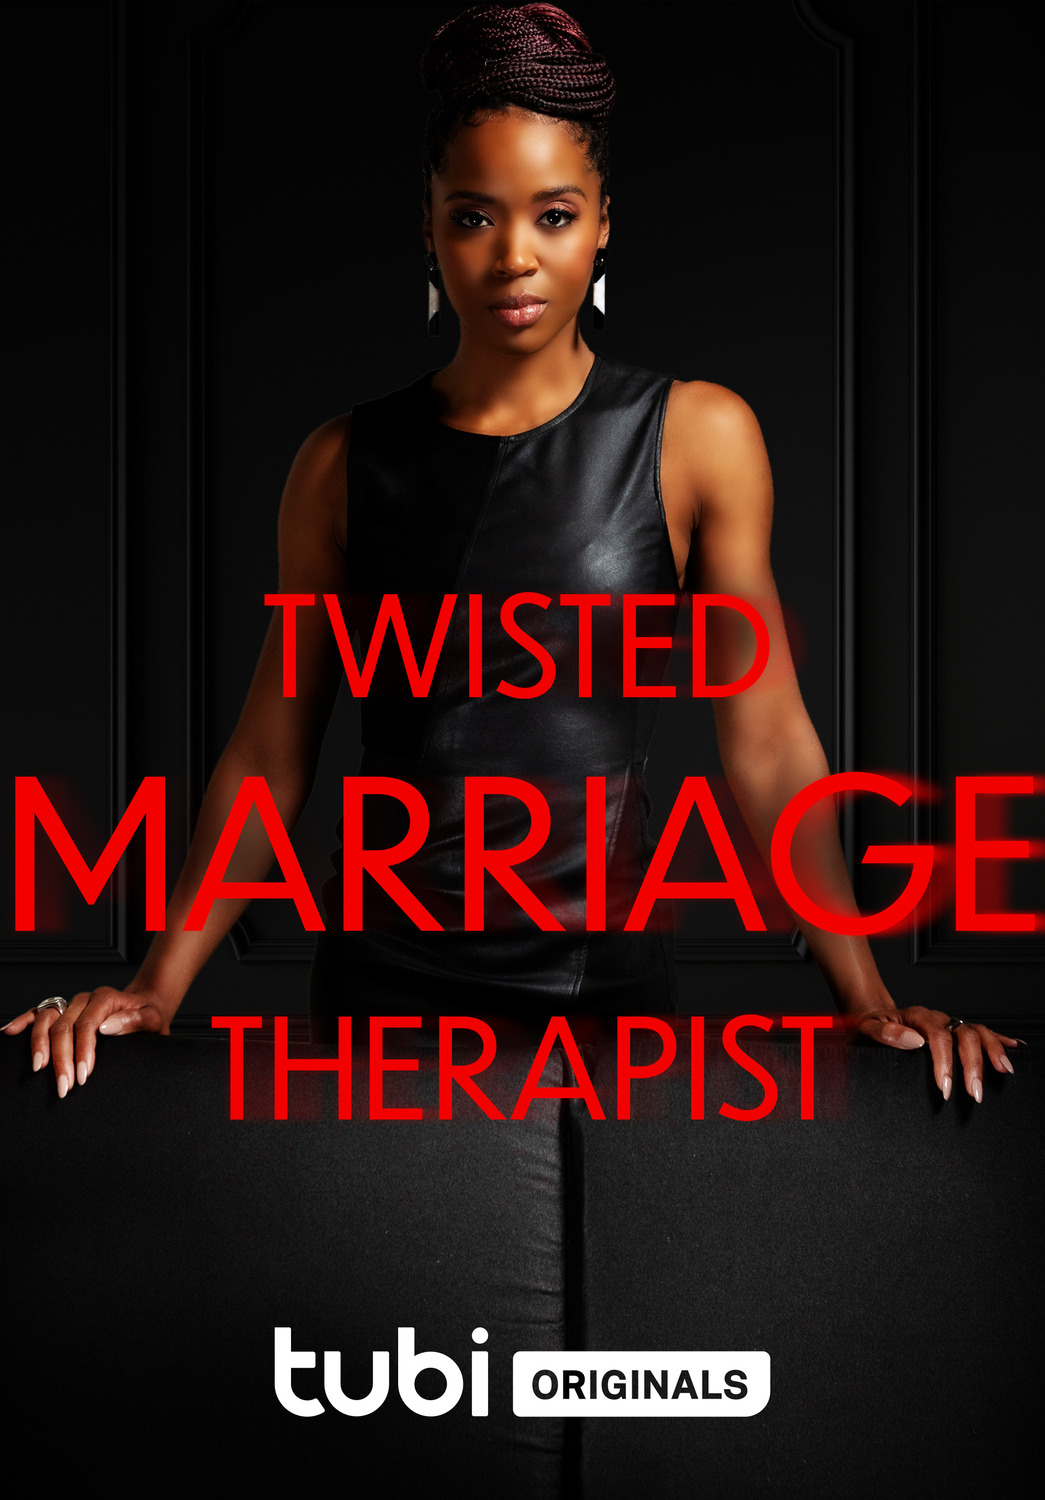 Extra Large Movie Poster Image for Twisted Marriage Therapist 